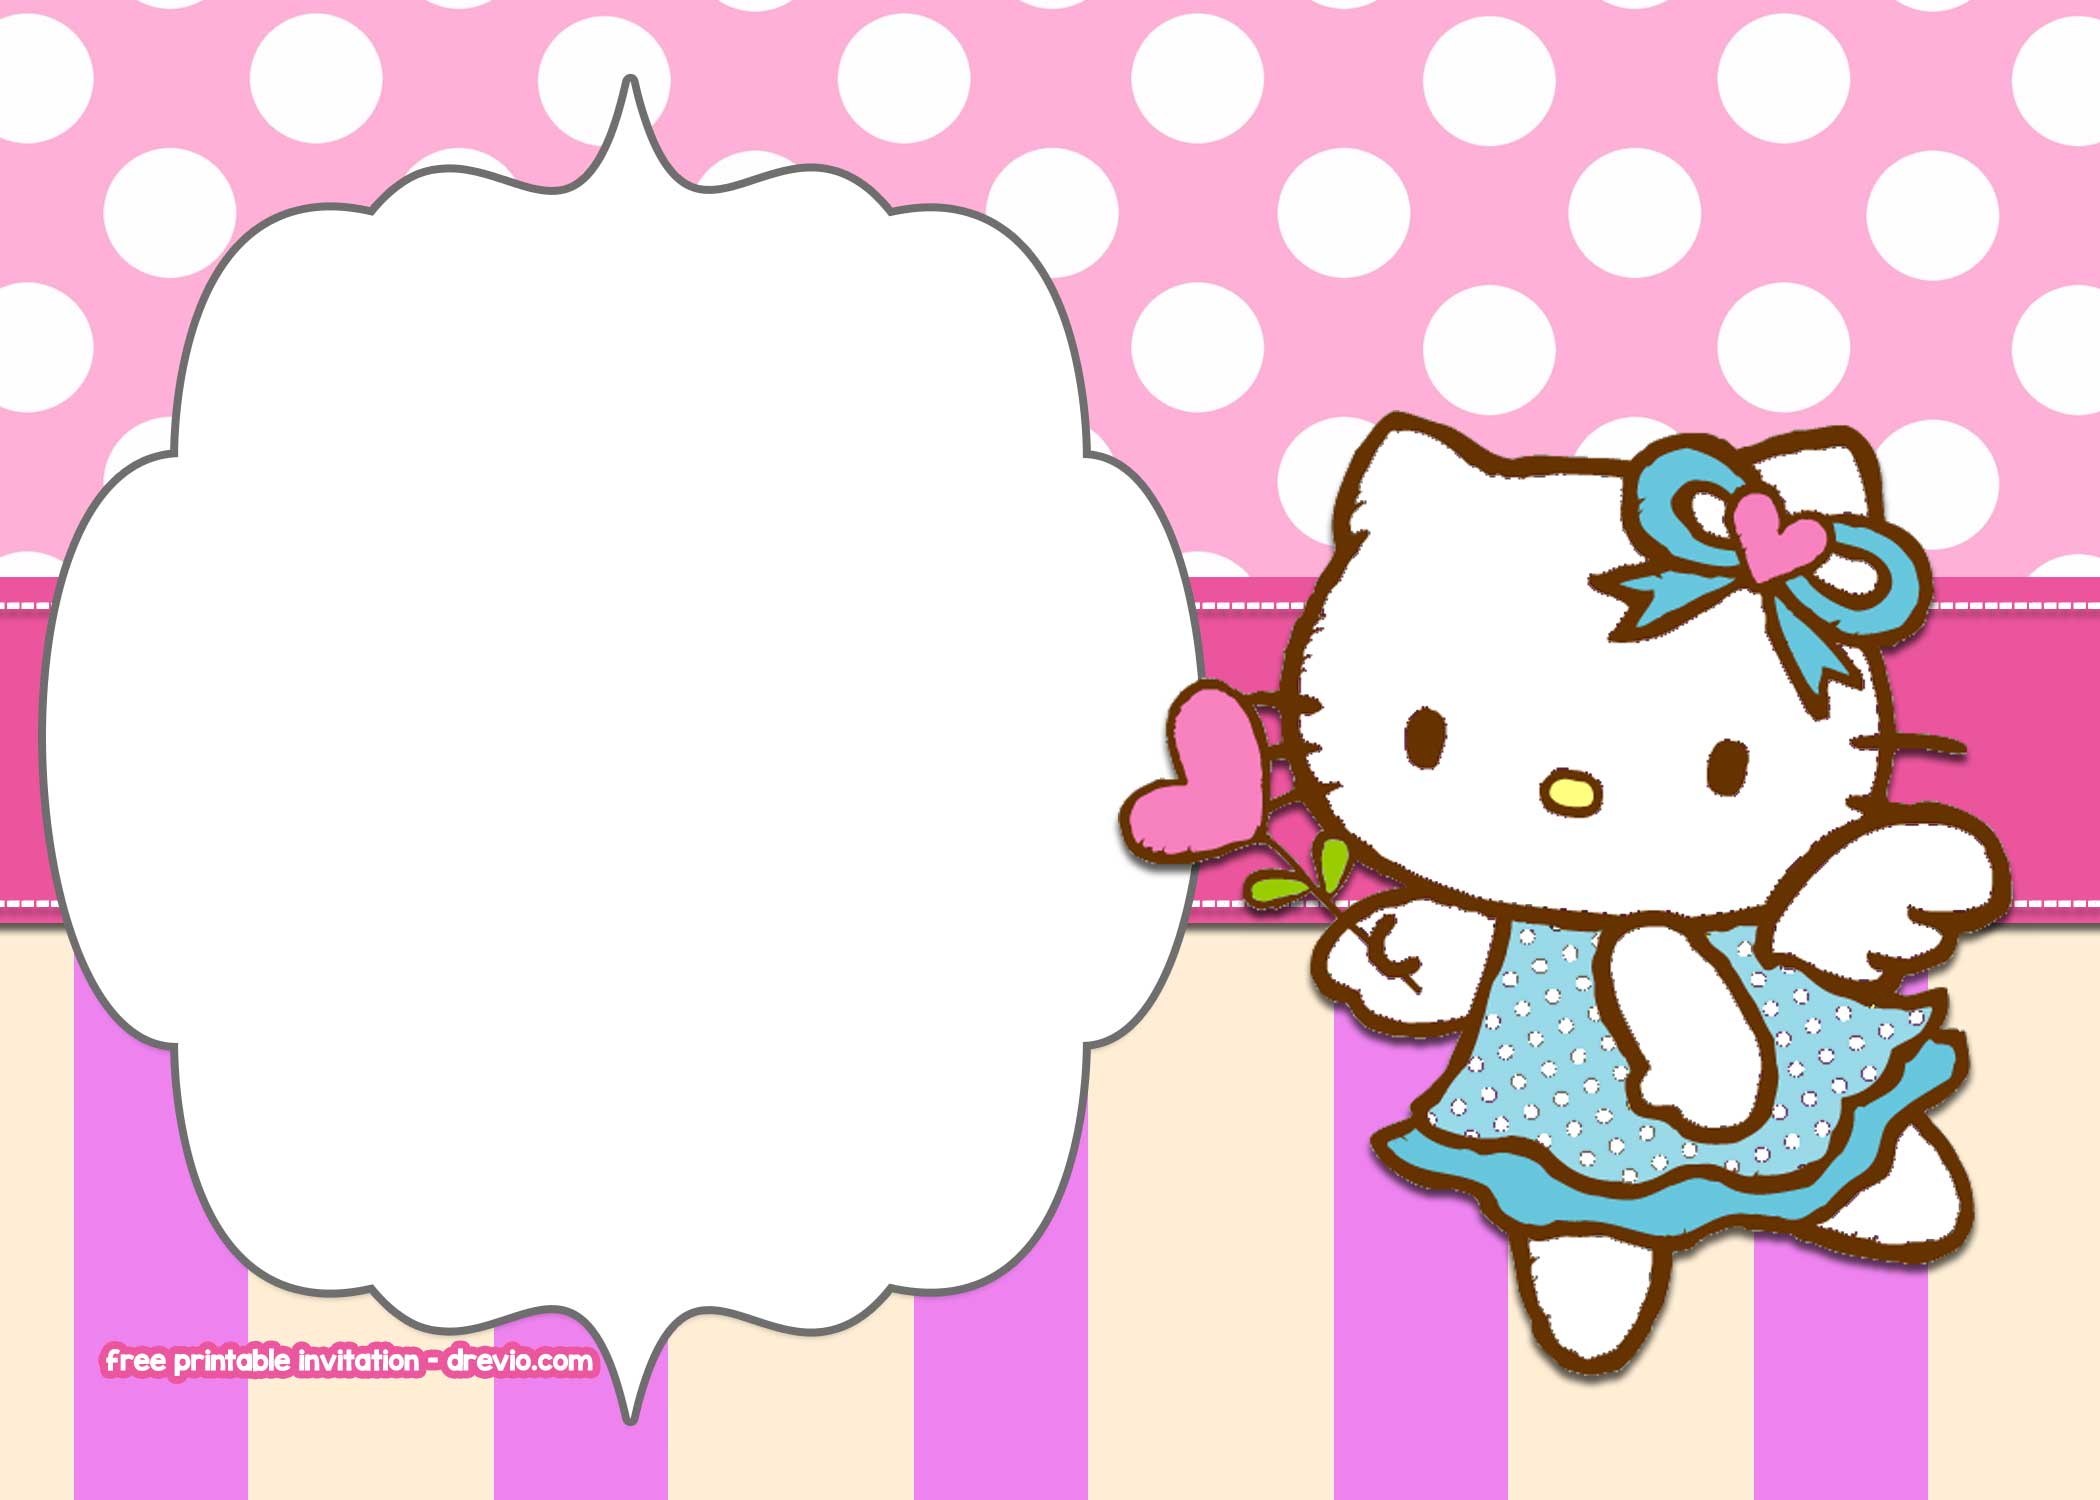 PSD Detail, Hello Kitty Pattern, Official PSDs